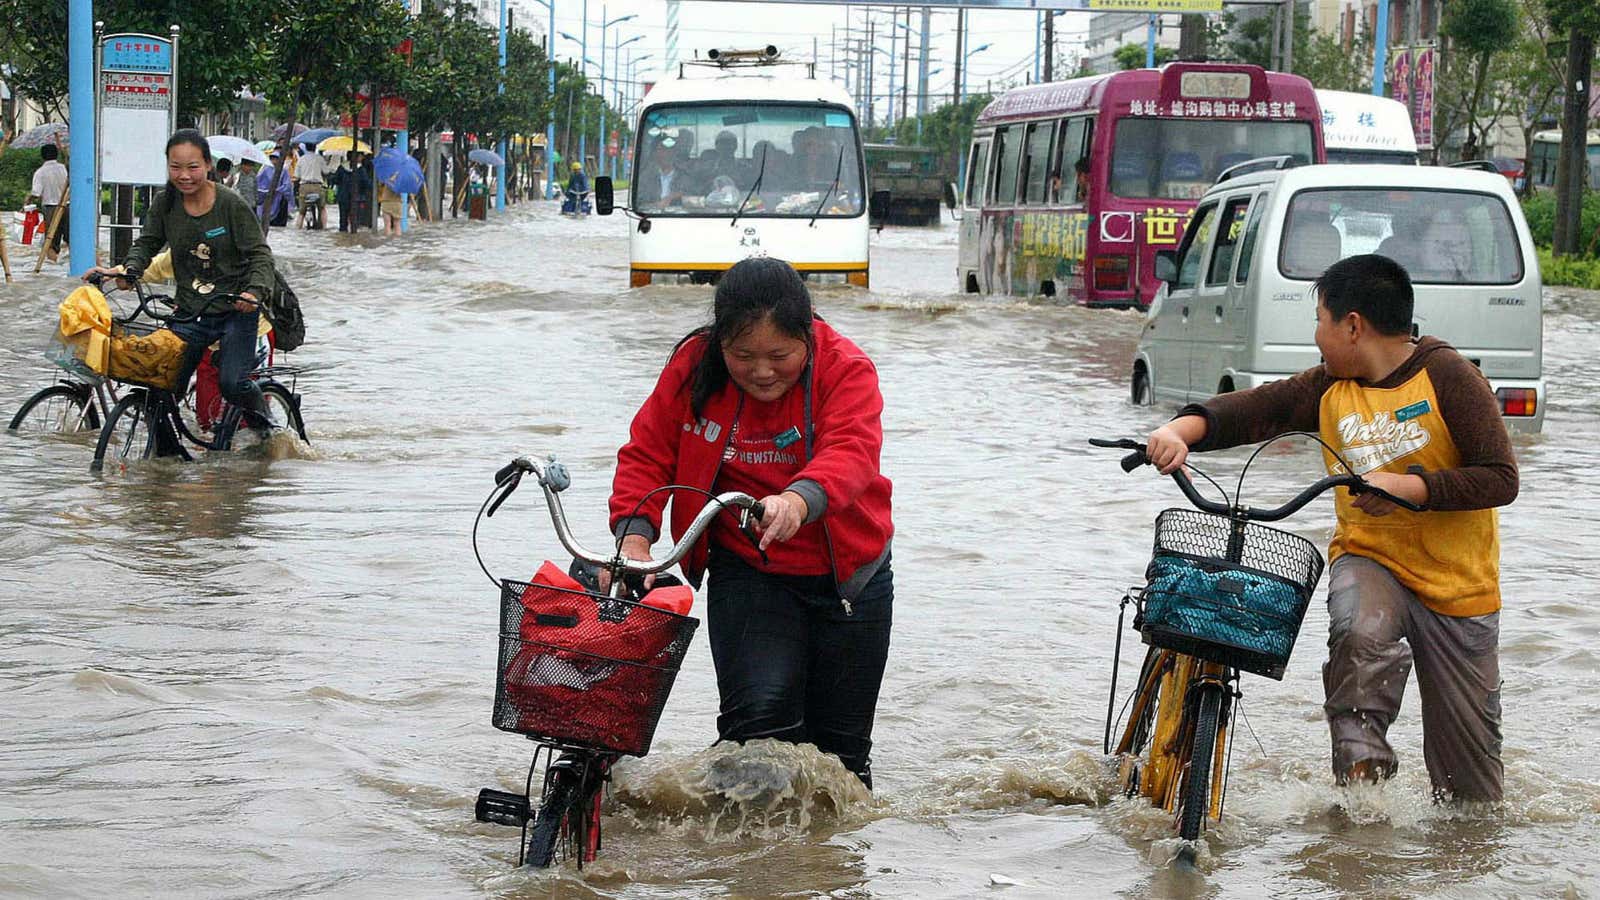 China, India, and the US have cities with the most exposed assets to coastal flooding, now and in the future.